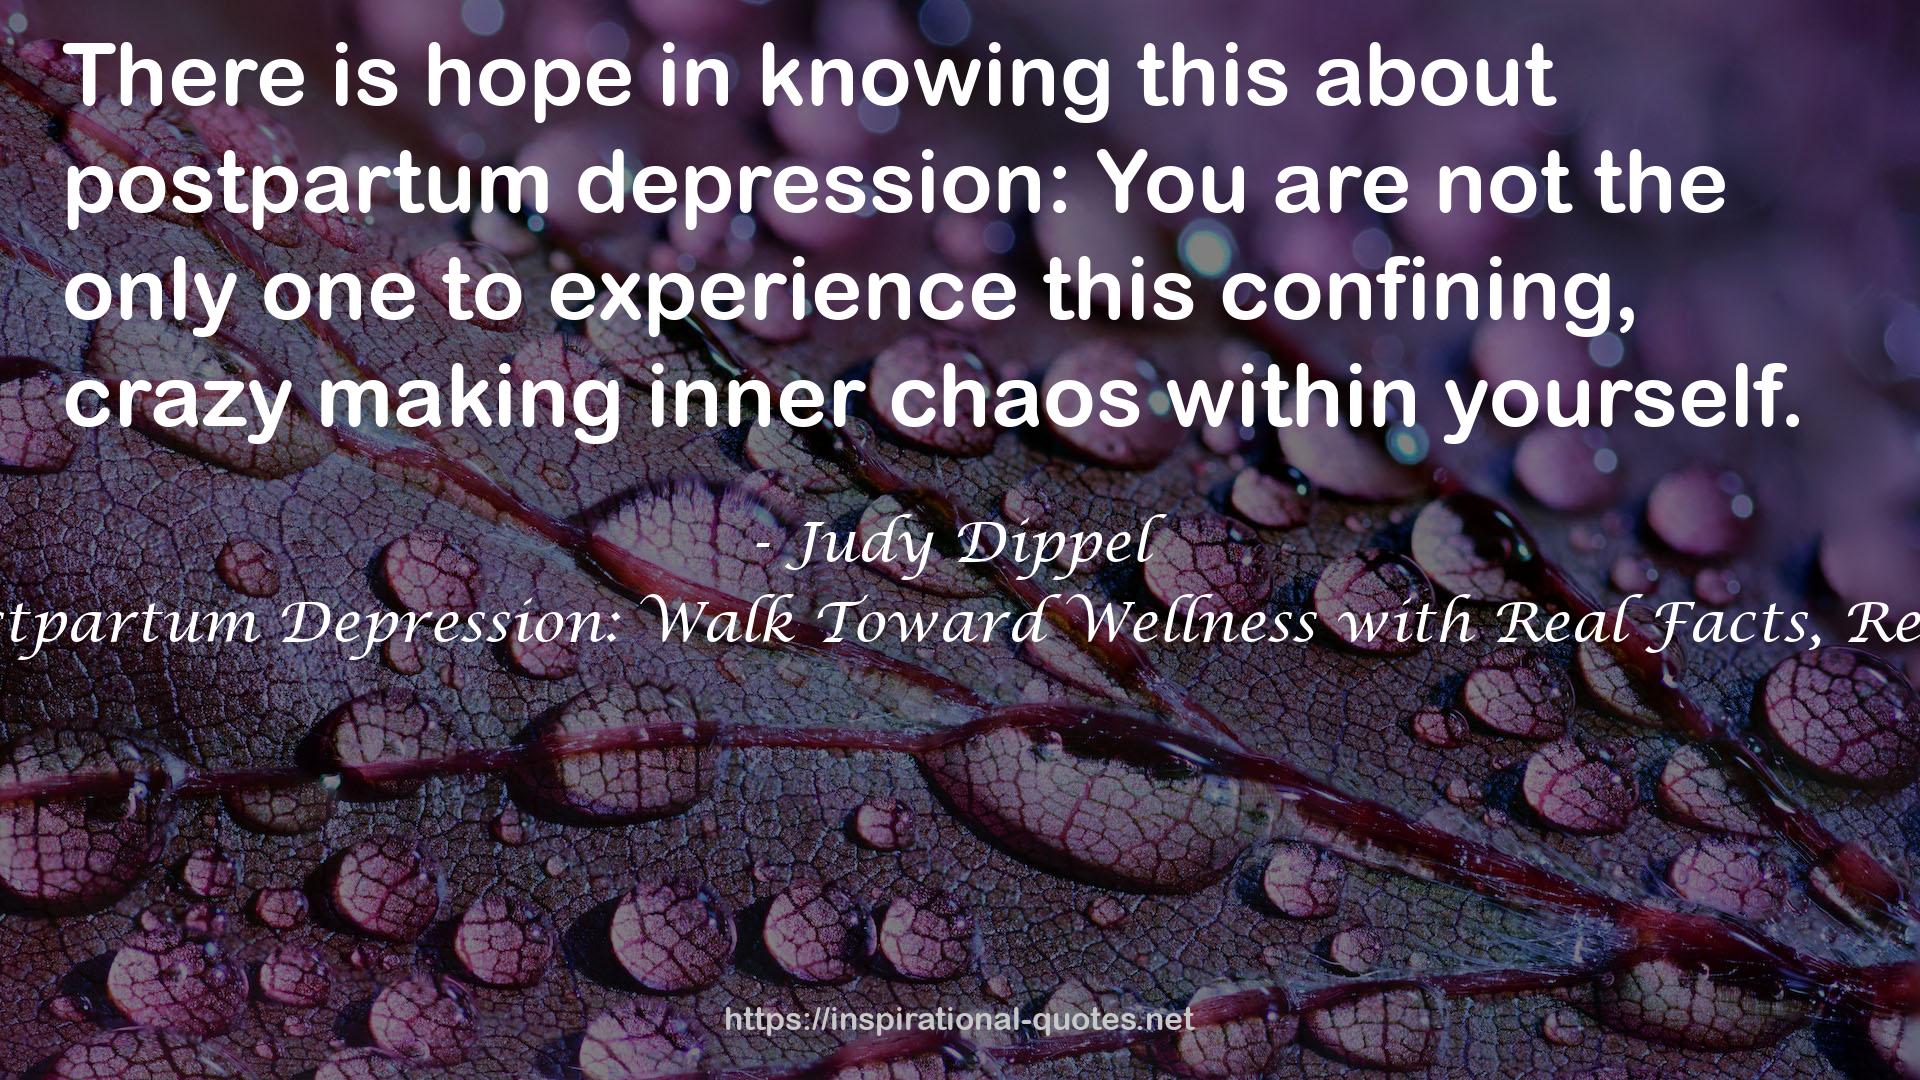 Breaking the Grip of Postpartum Depression: Walk Toward Wellness with Real Facts, Real Stories, and Real God QUOTES